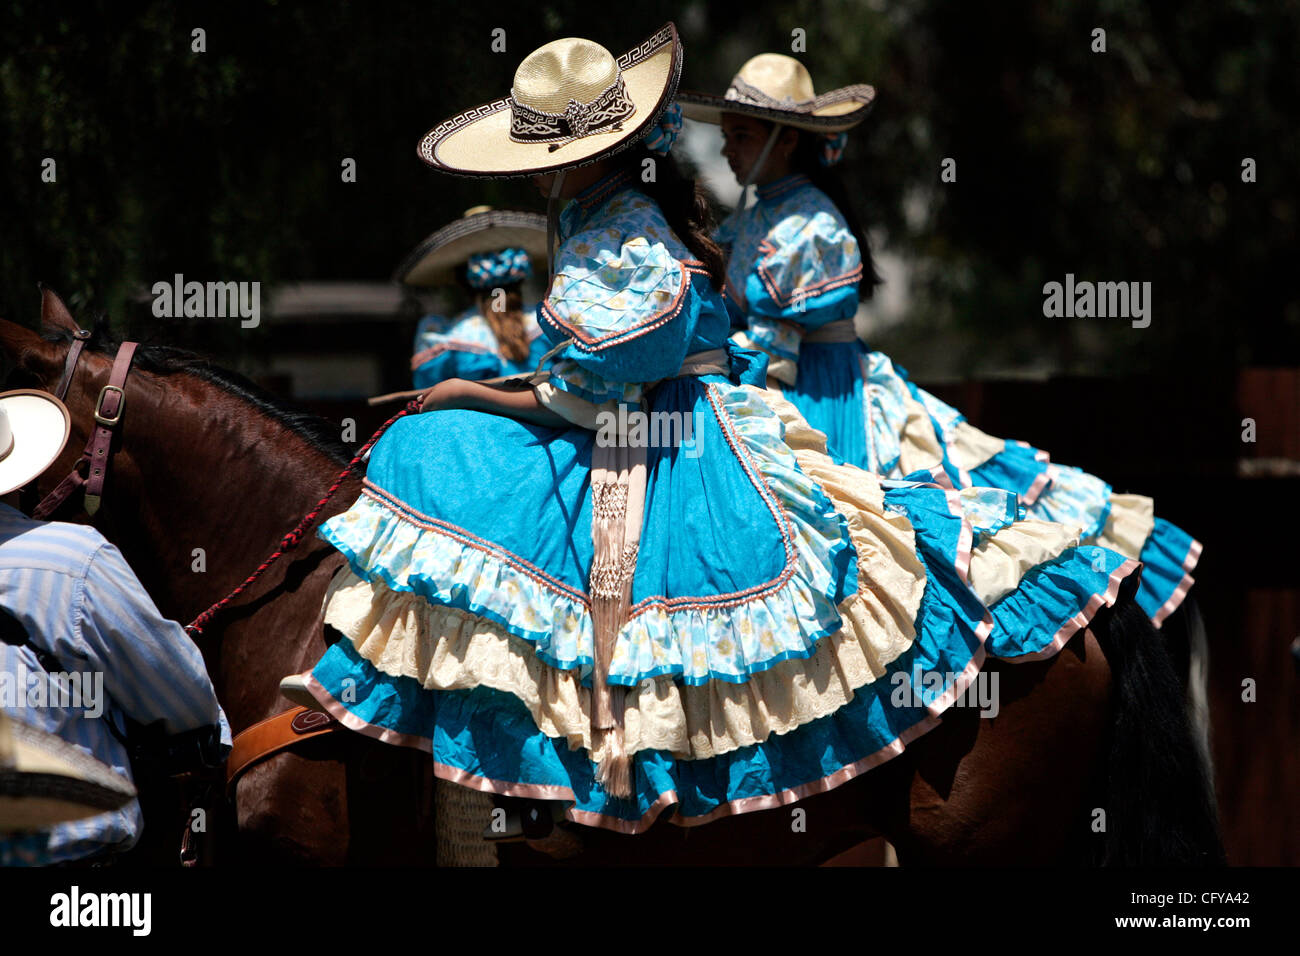 May 5, 2007, San Diego, California, USA The Escaramuzas Golondrinas, a  female equestrian group that follows the Mexican cowboy traditions, worked  out their horses at the Seeley Stables in Old Town prior